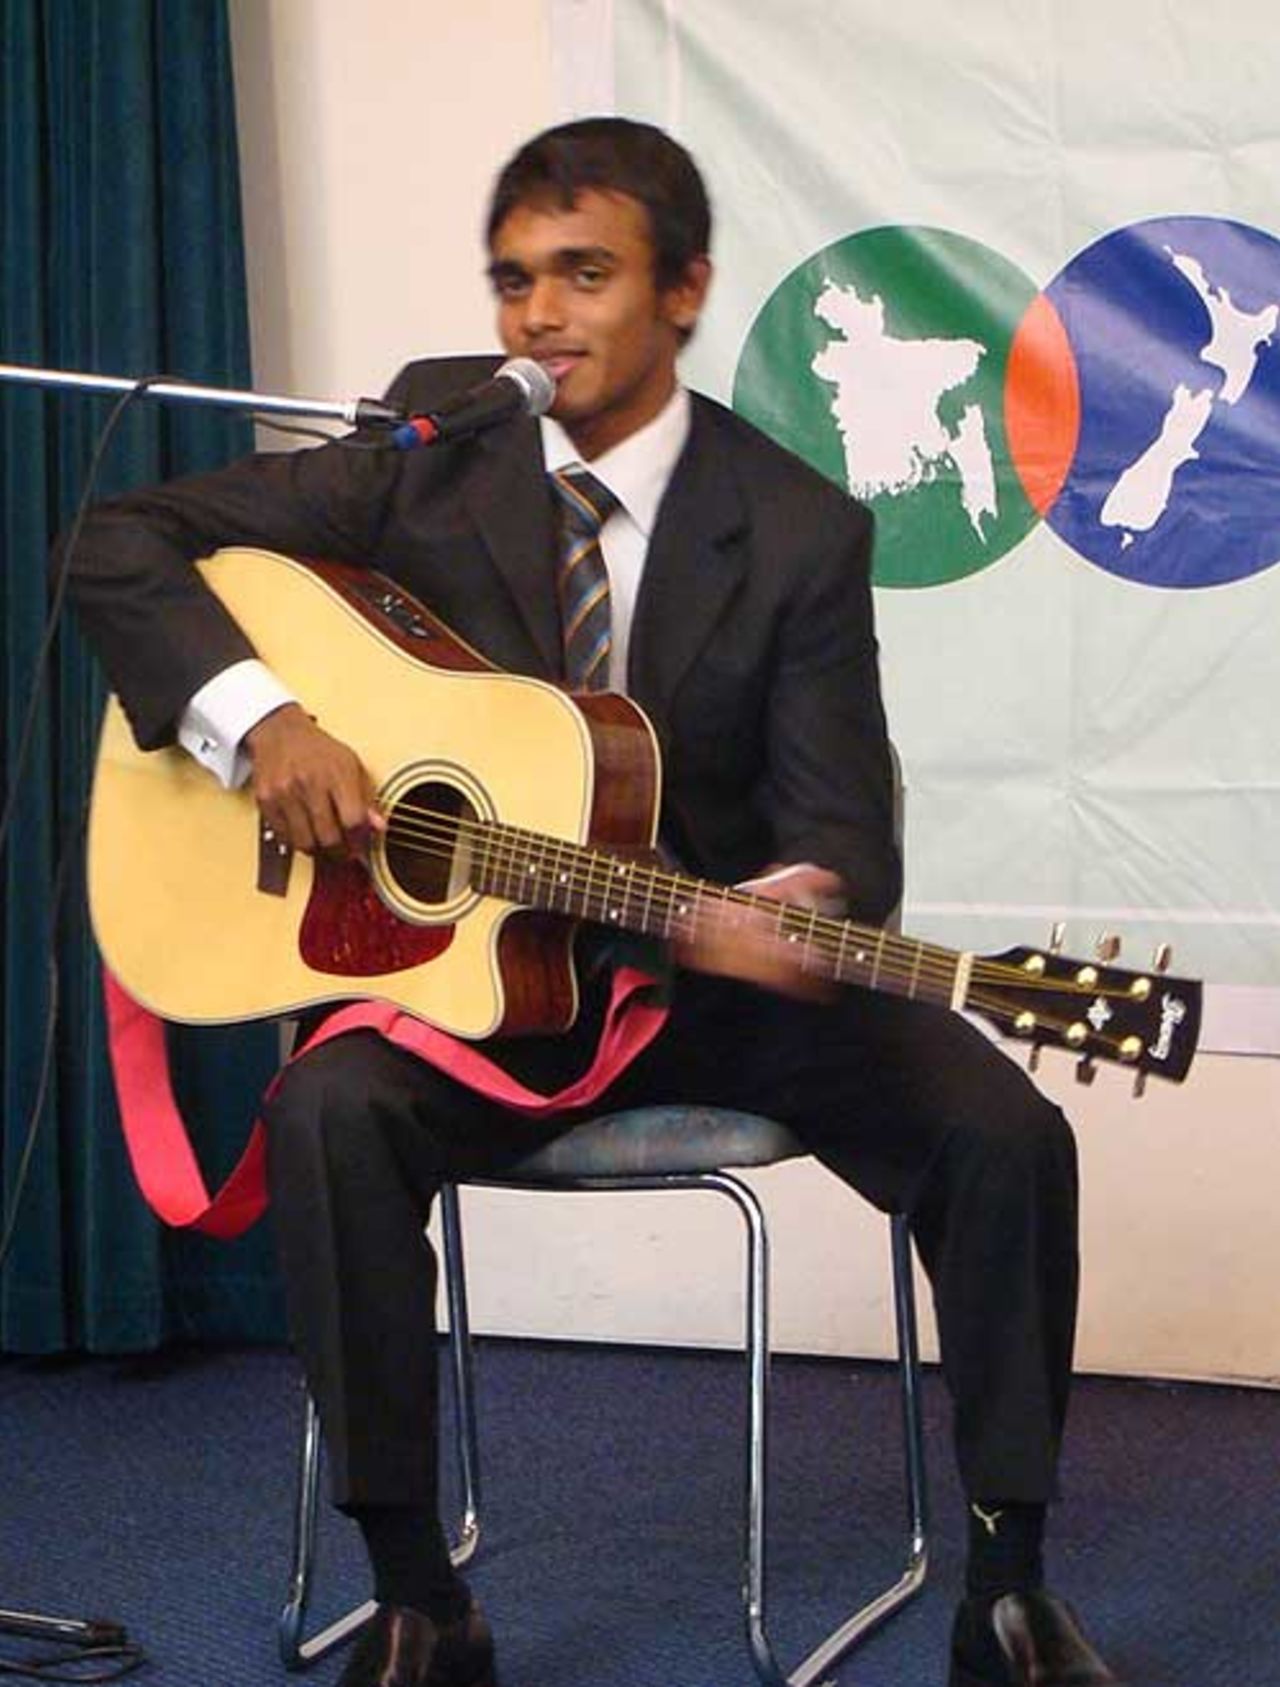 Mehrab Hossain sings a Ronan Keating cover at a reception, Auckland, December 24, 2007